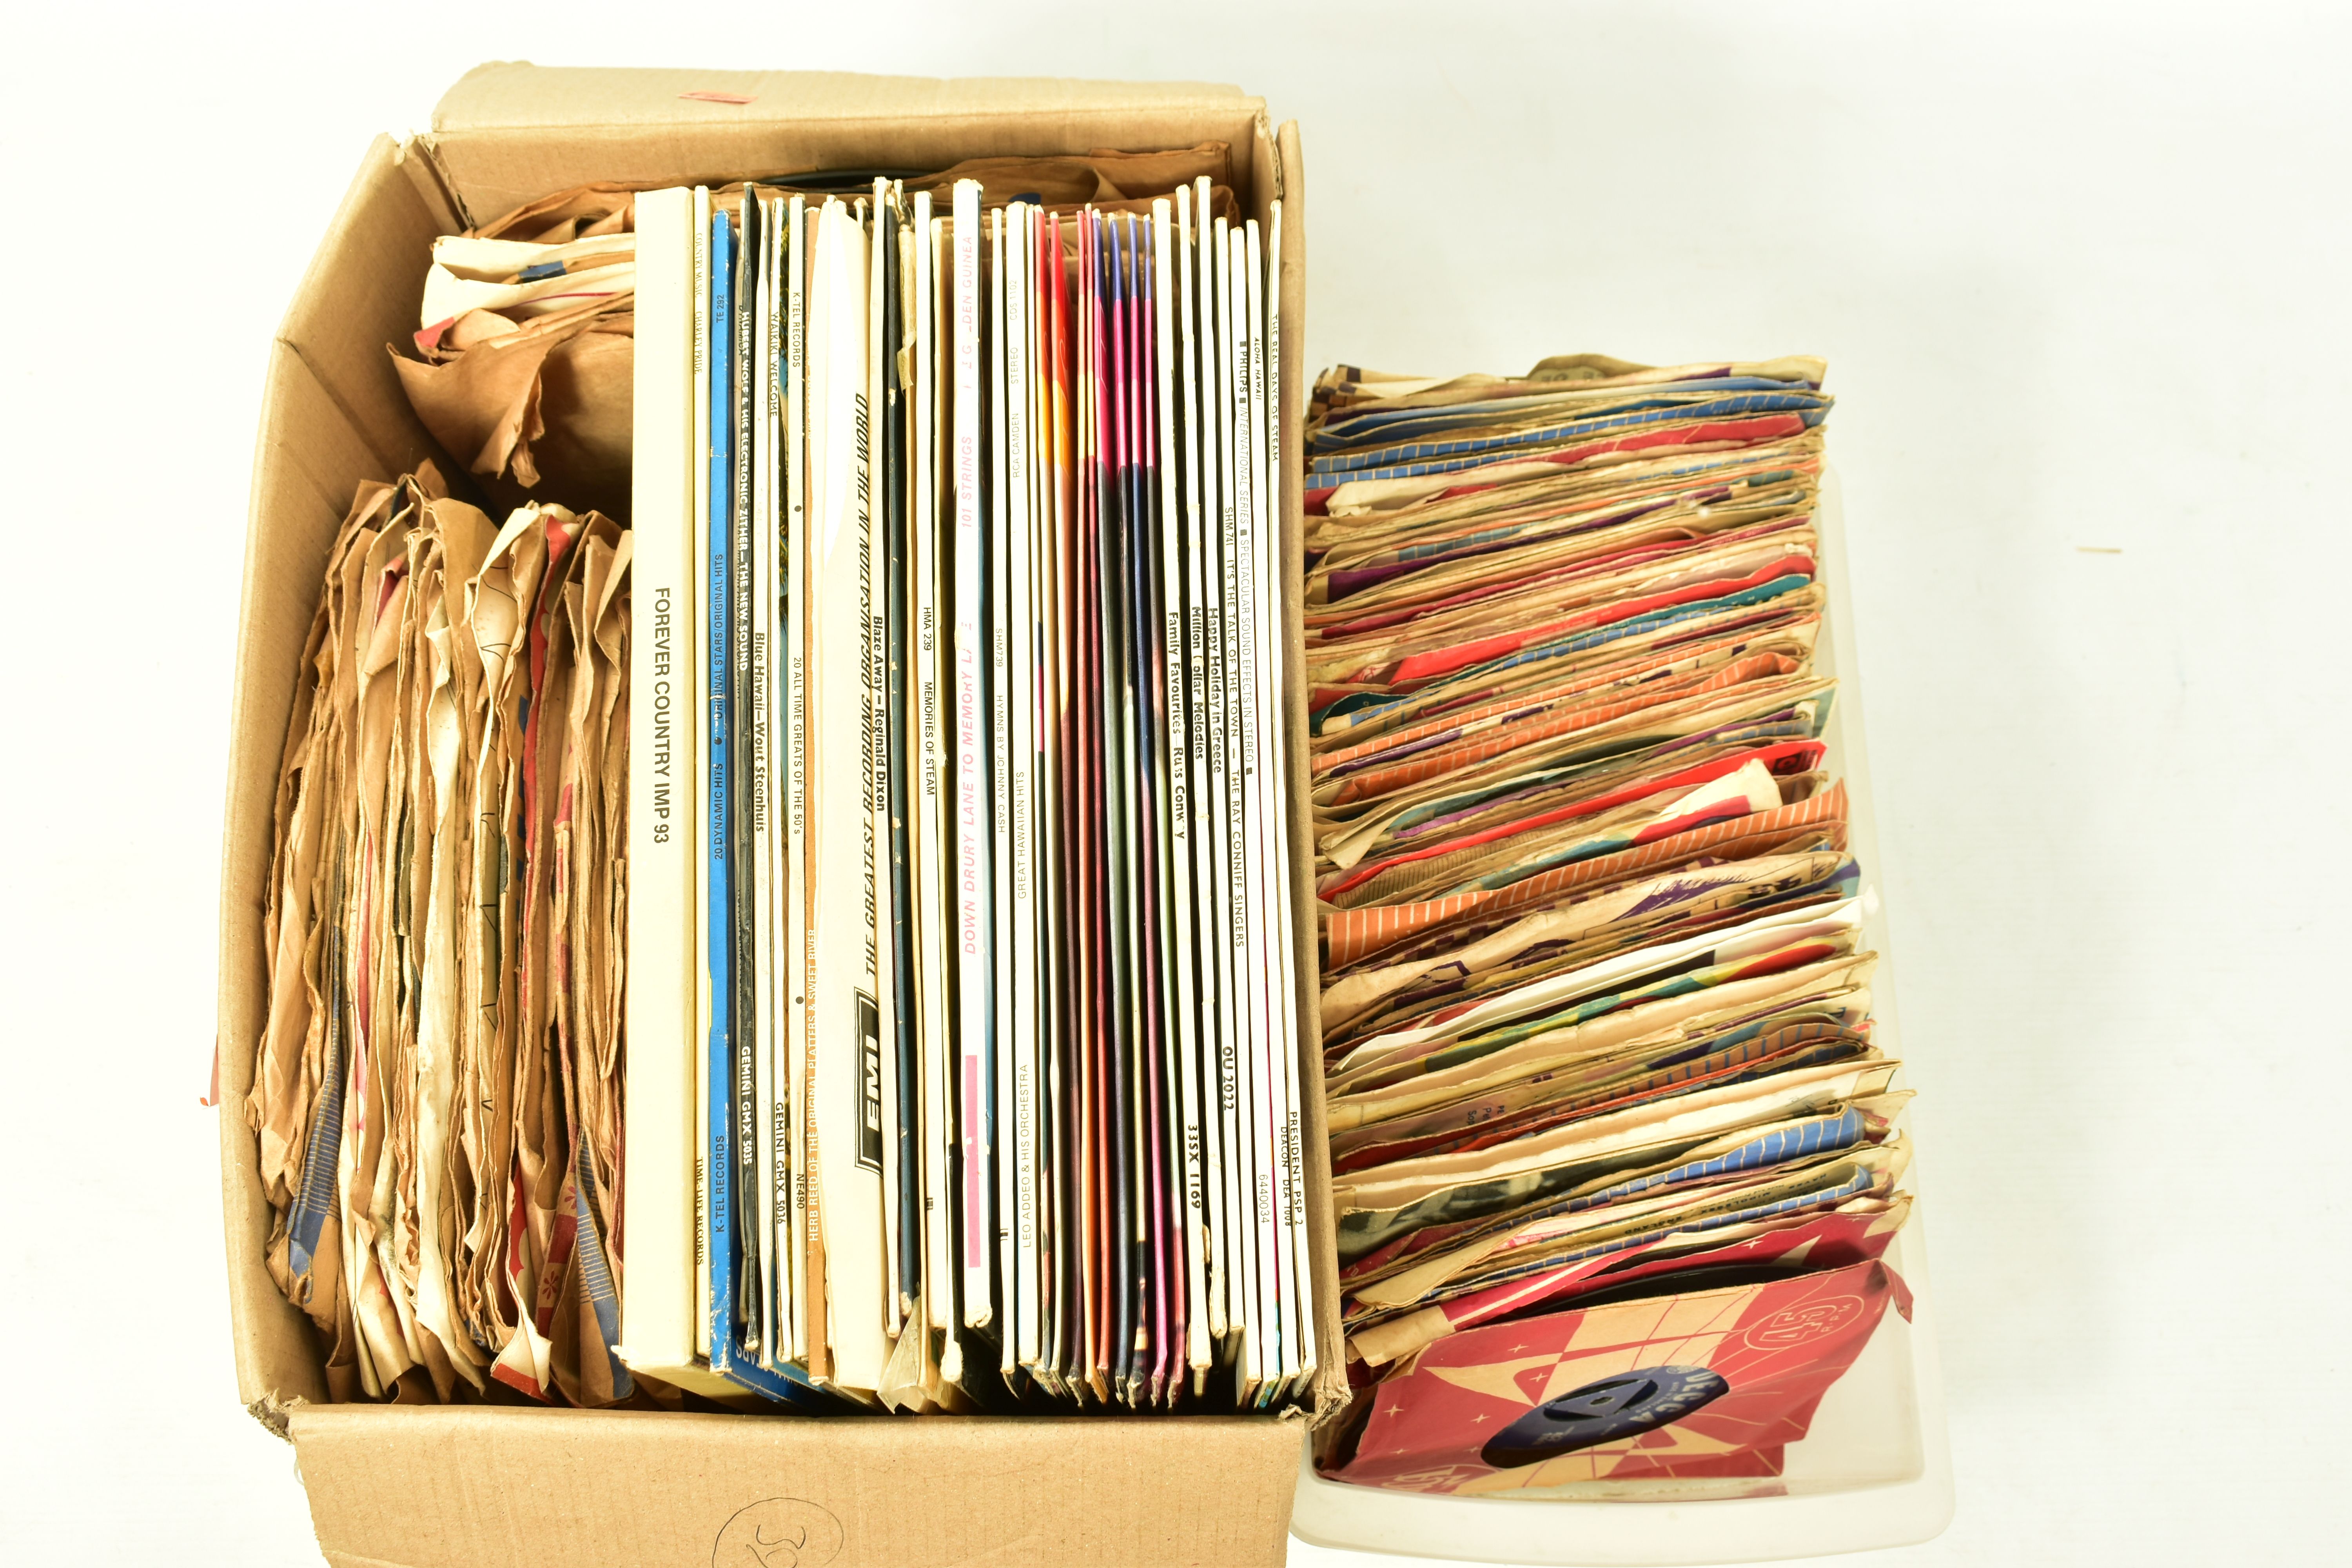 TWO TRAYS CONTAINING OVER SIXTY 78s, THIRTY SIX LPs AND OVER ONE HUNDRED SINGLES by artists such